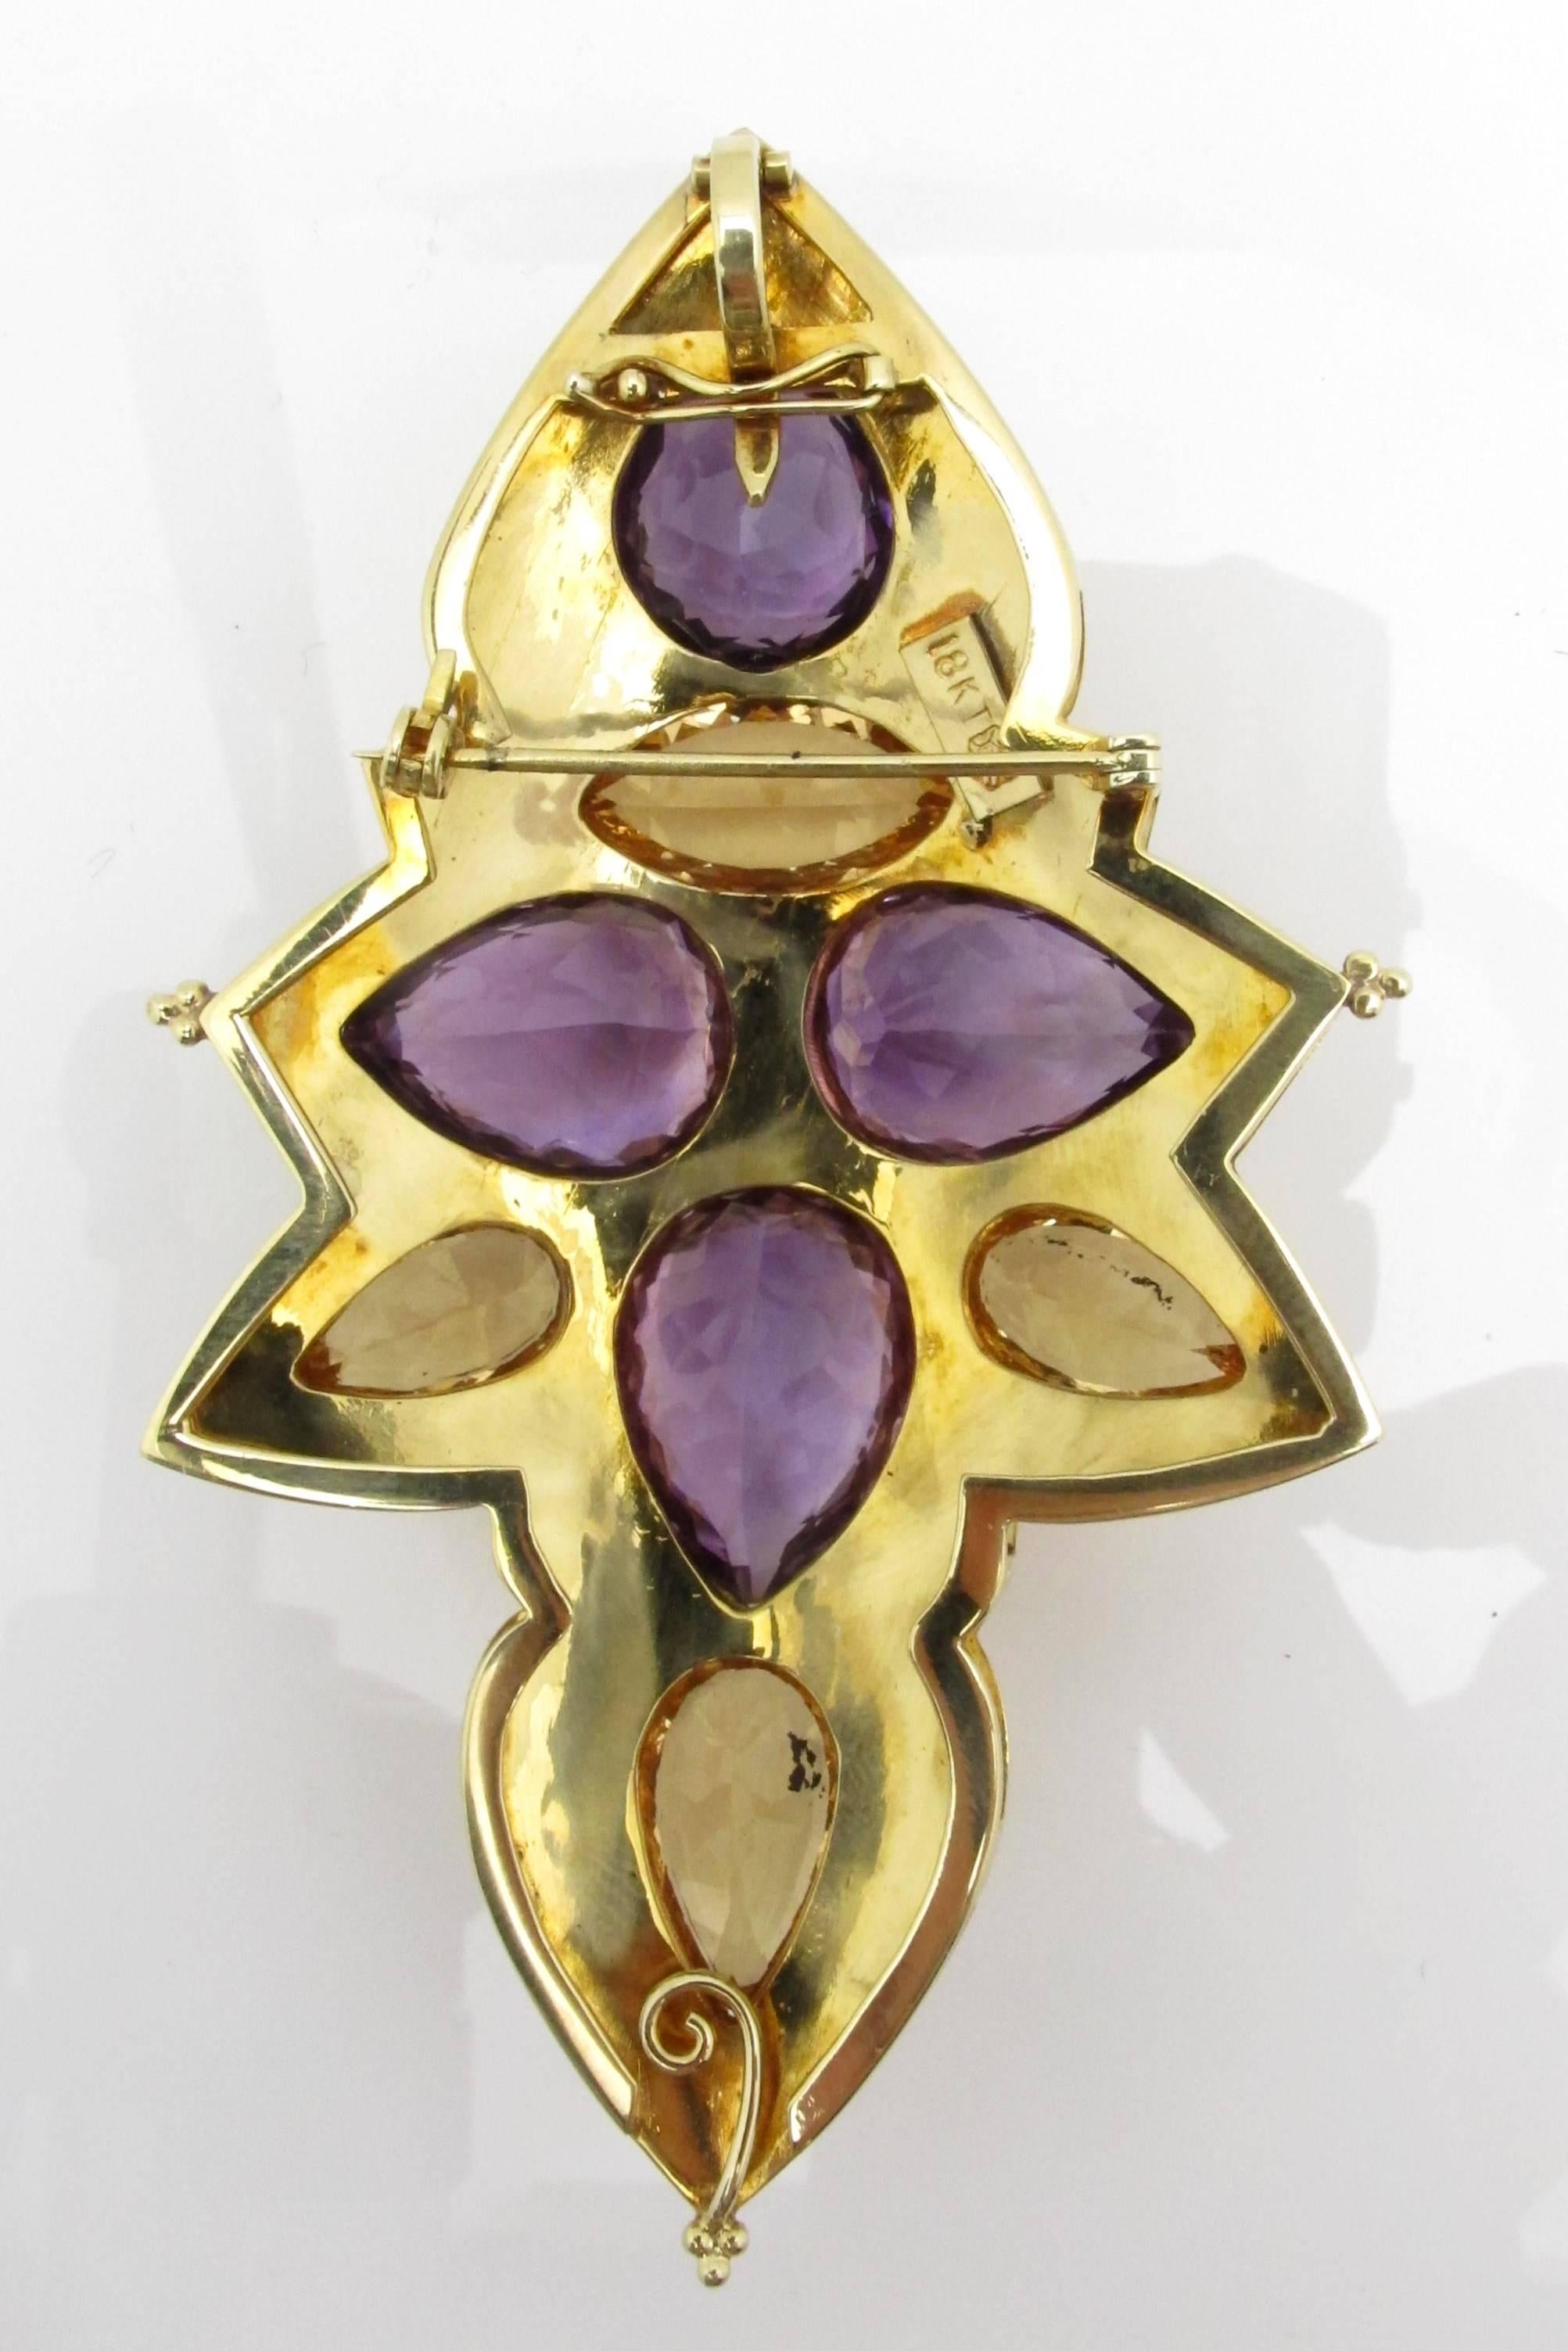 Imperial Topaz Amethyst Gold Pin Pendant In Excellent Condition For Sale In Santa Fe, NM